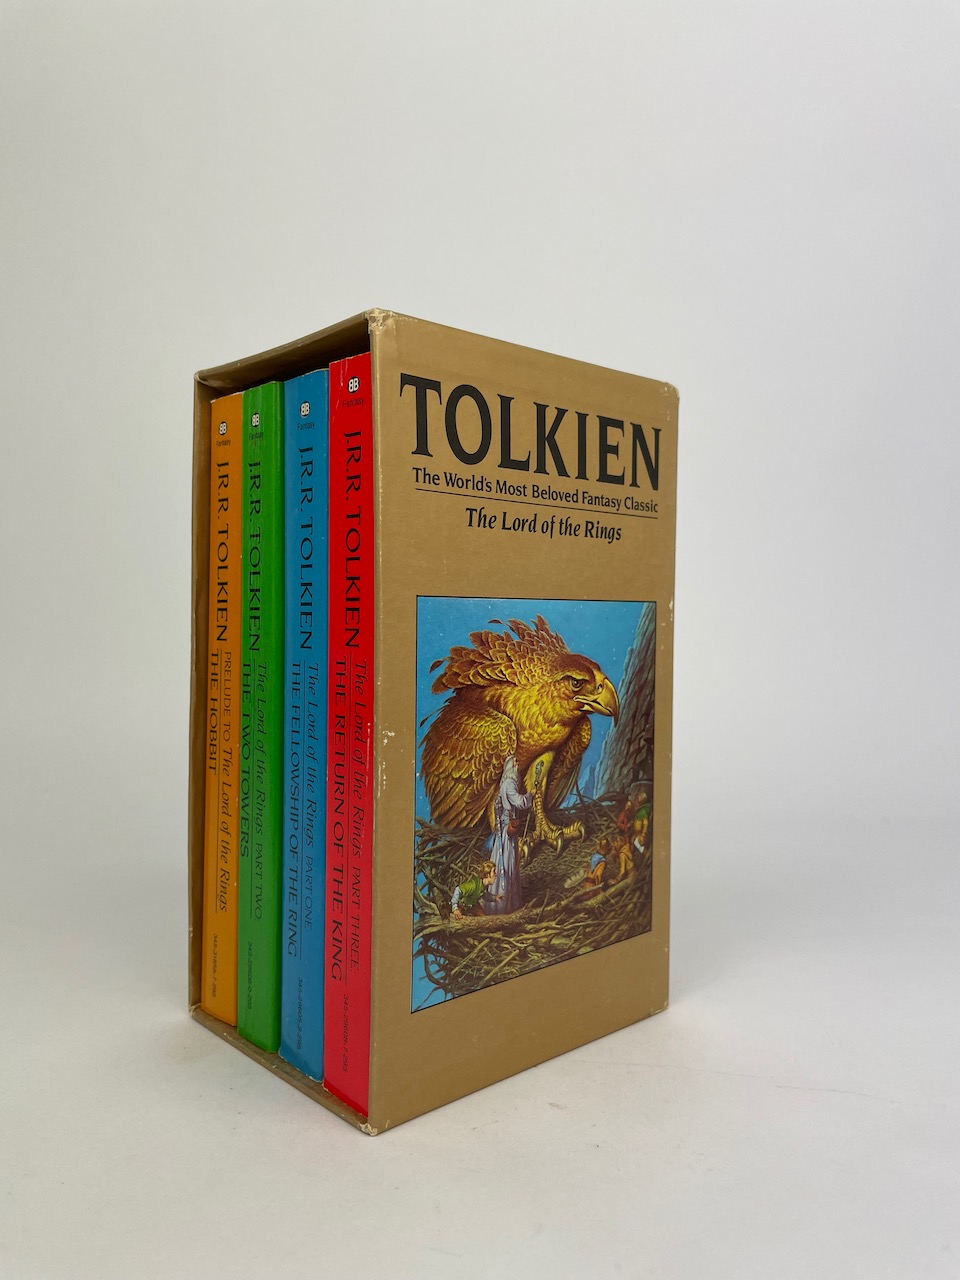 The Lord of the Rings and The Hobbit set from 1984, by Ballantine Books, New York